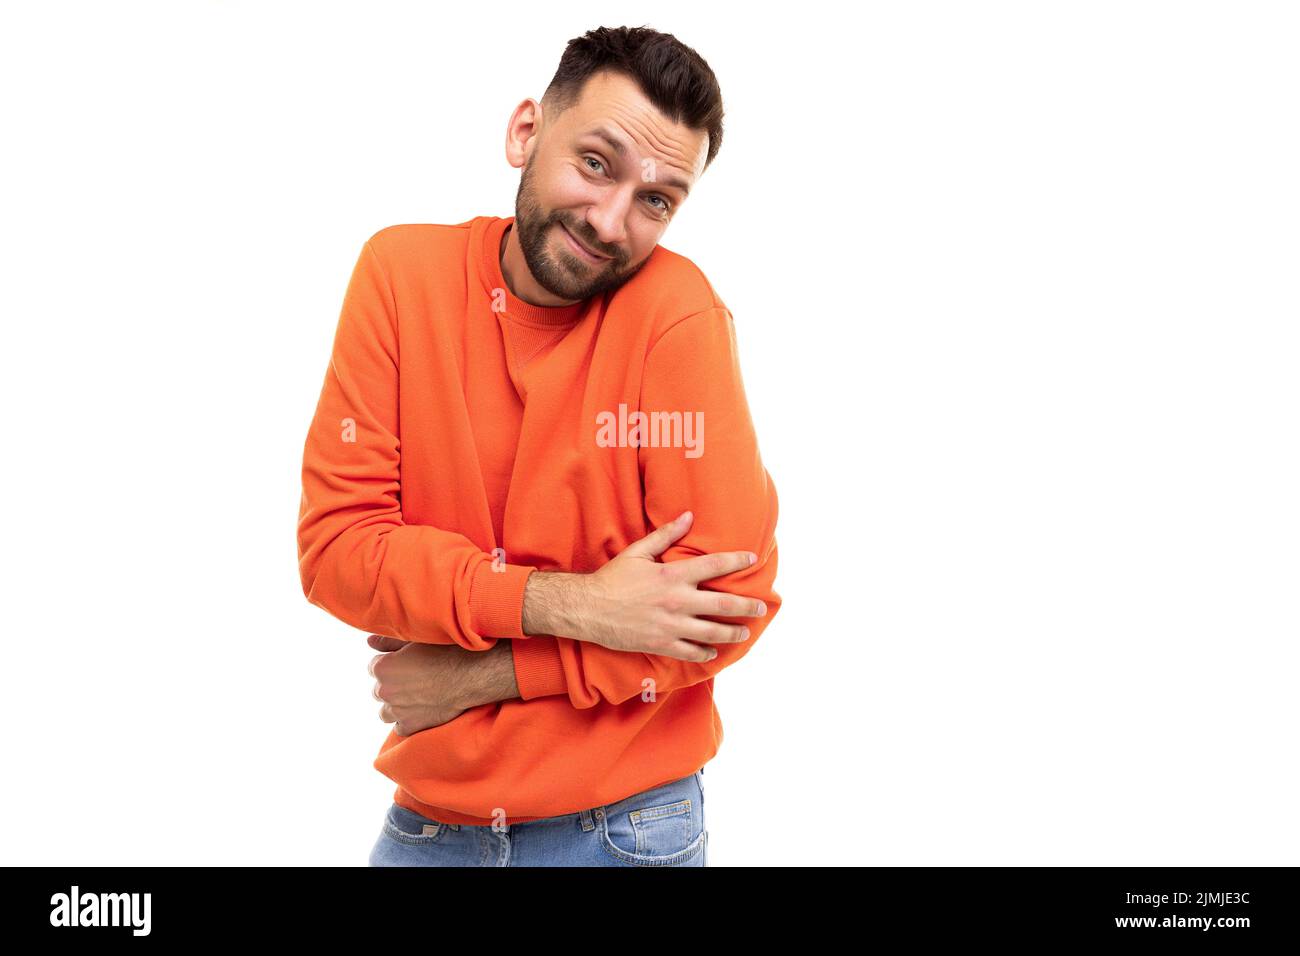 Shy bearded man in a stylish orange longsleeve shyly closes his hands against the background of a white wall Stock Photo